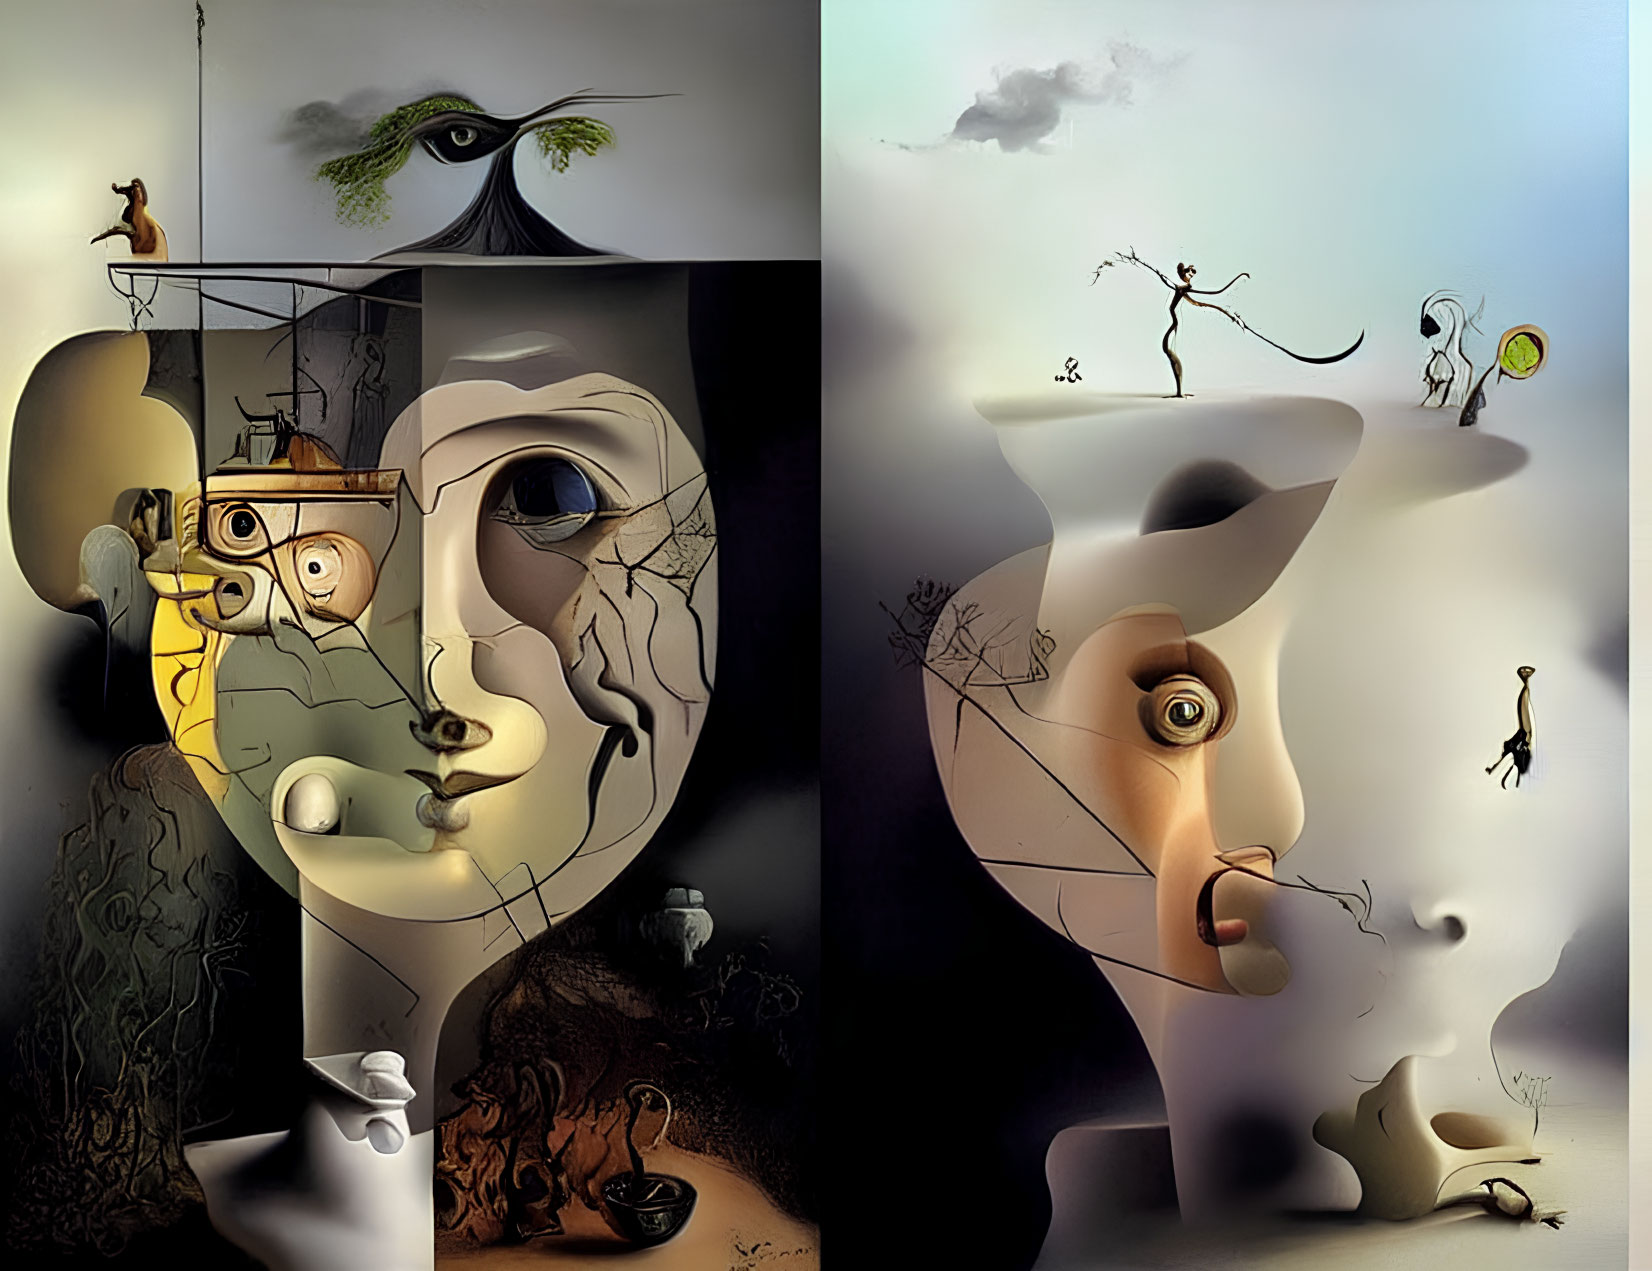 Fragmented Faces with Eye, Birds, and Fisherman in Surreal Art